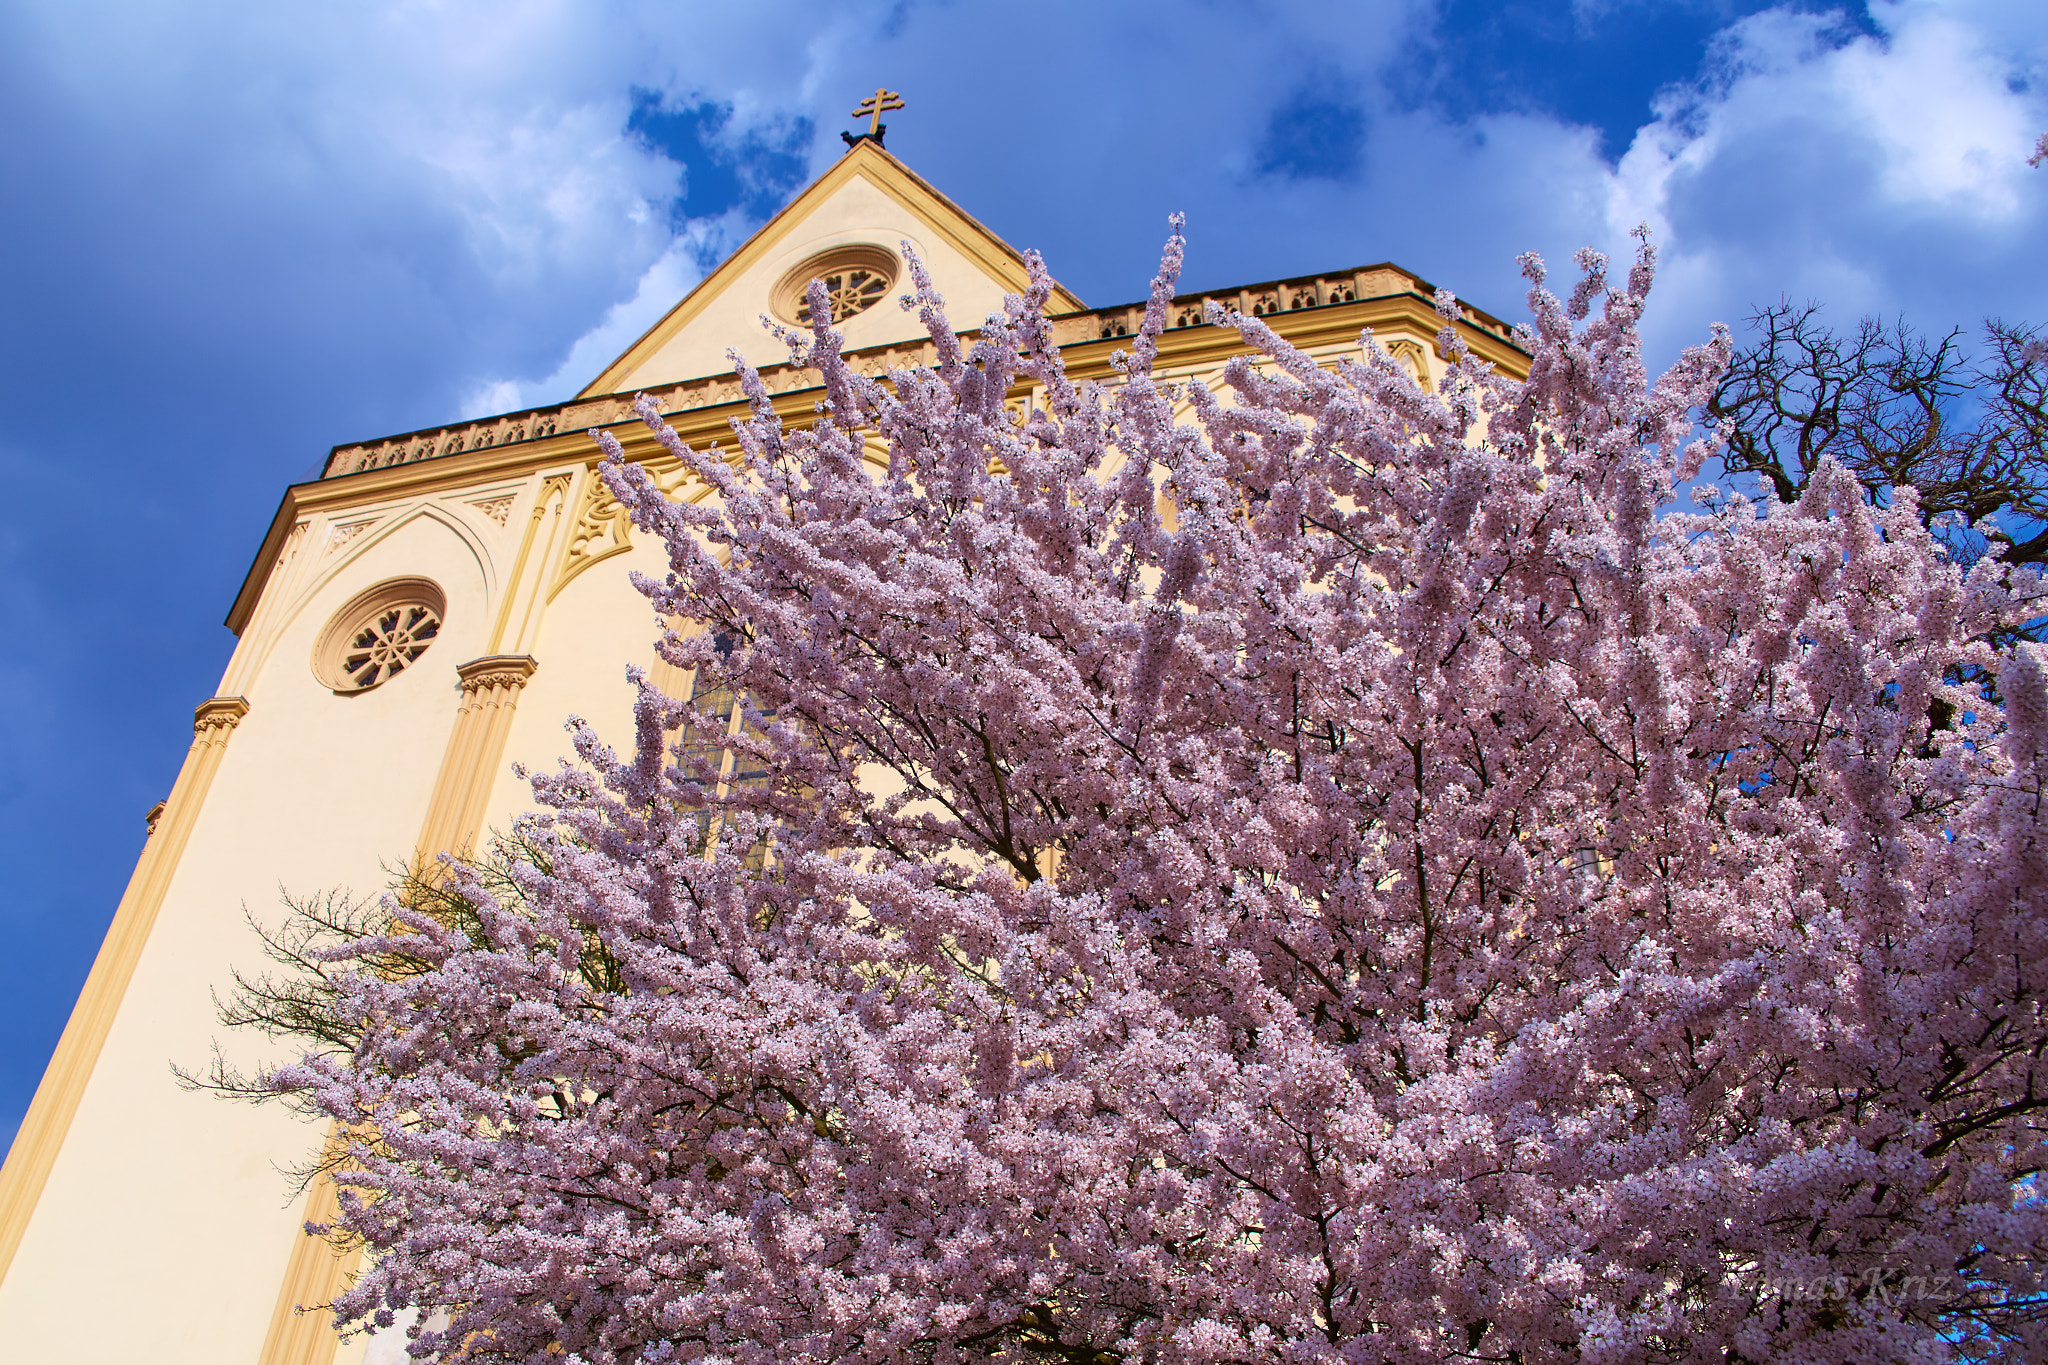 Tamron 28-300mm F3.5-6.3 Di VC PZD sample photo. Tree blossom and church photography